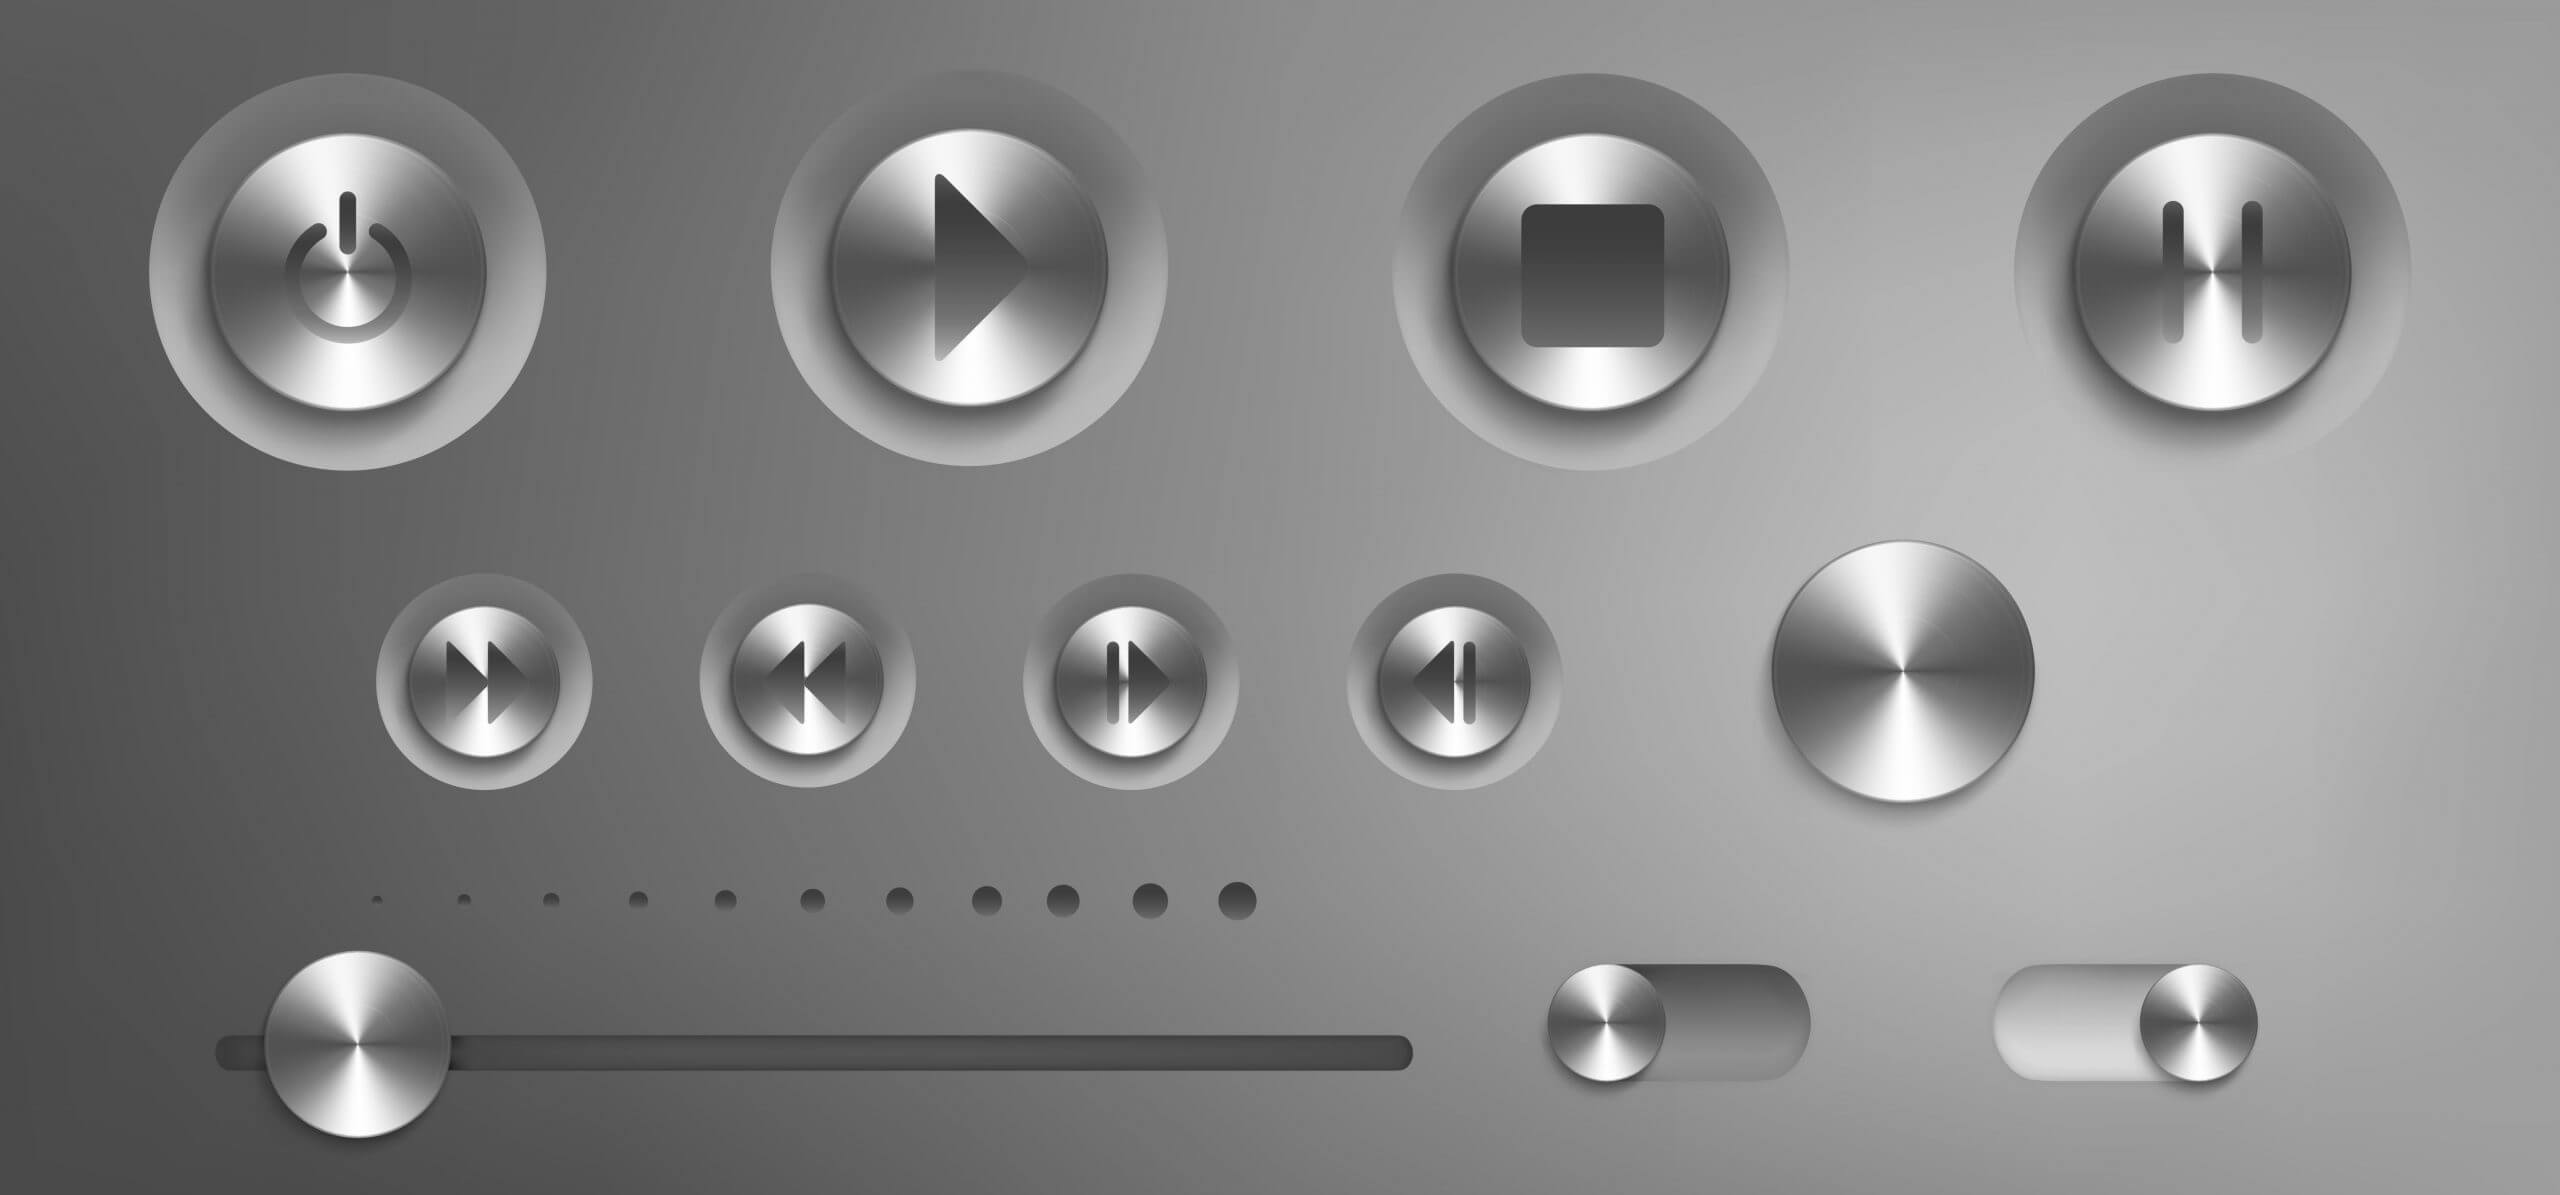 Music control panel with steel buttons and knobs